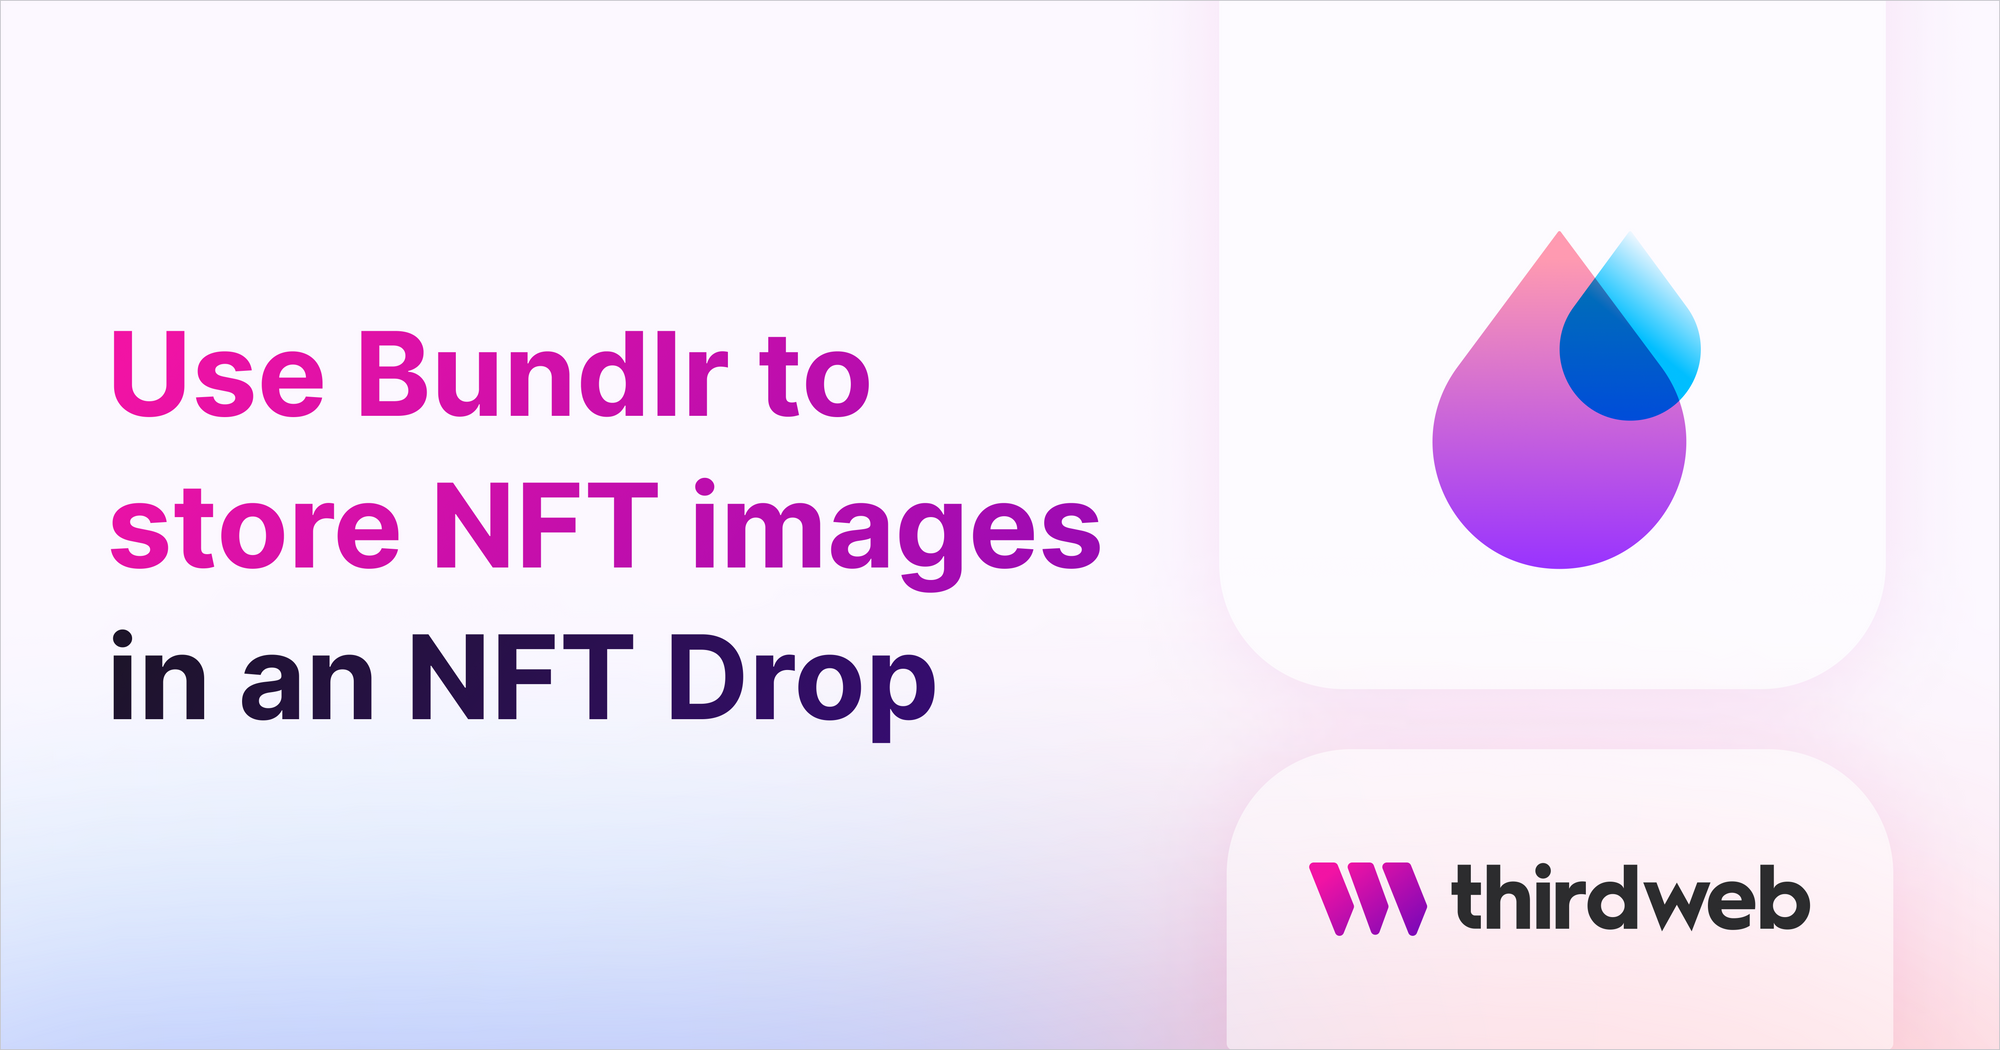 Use Bundlr to store NFT images in an NFT Drop